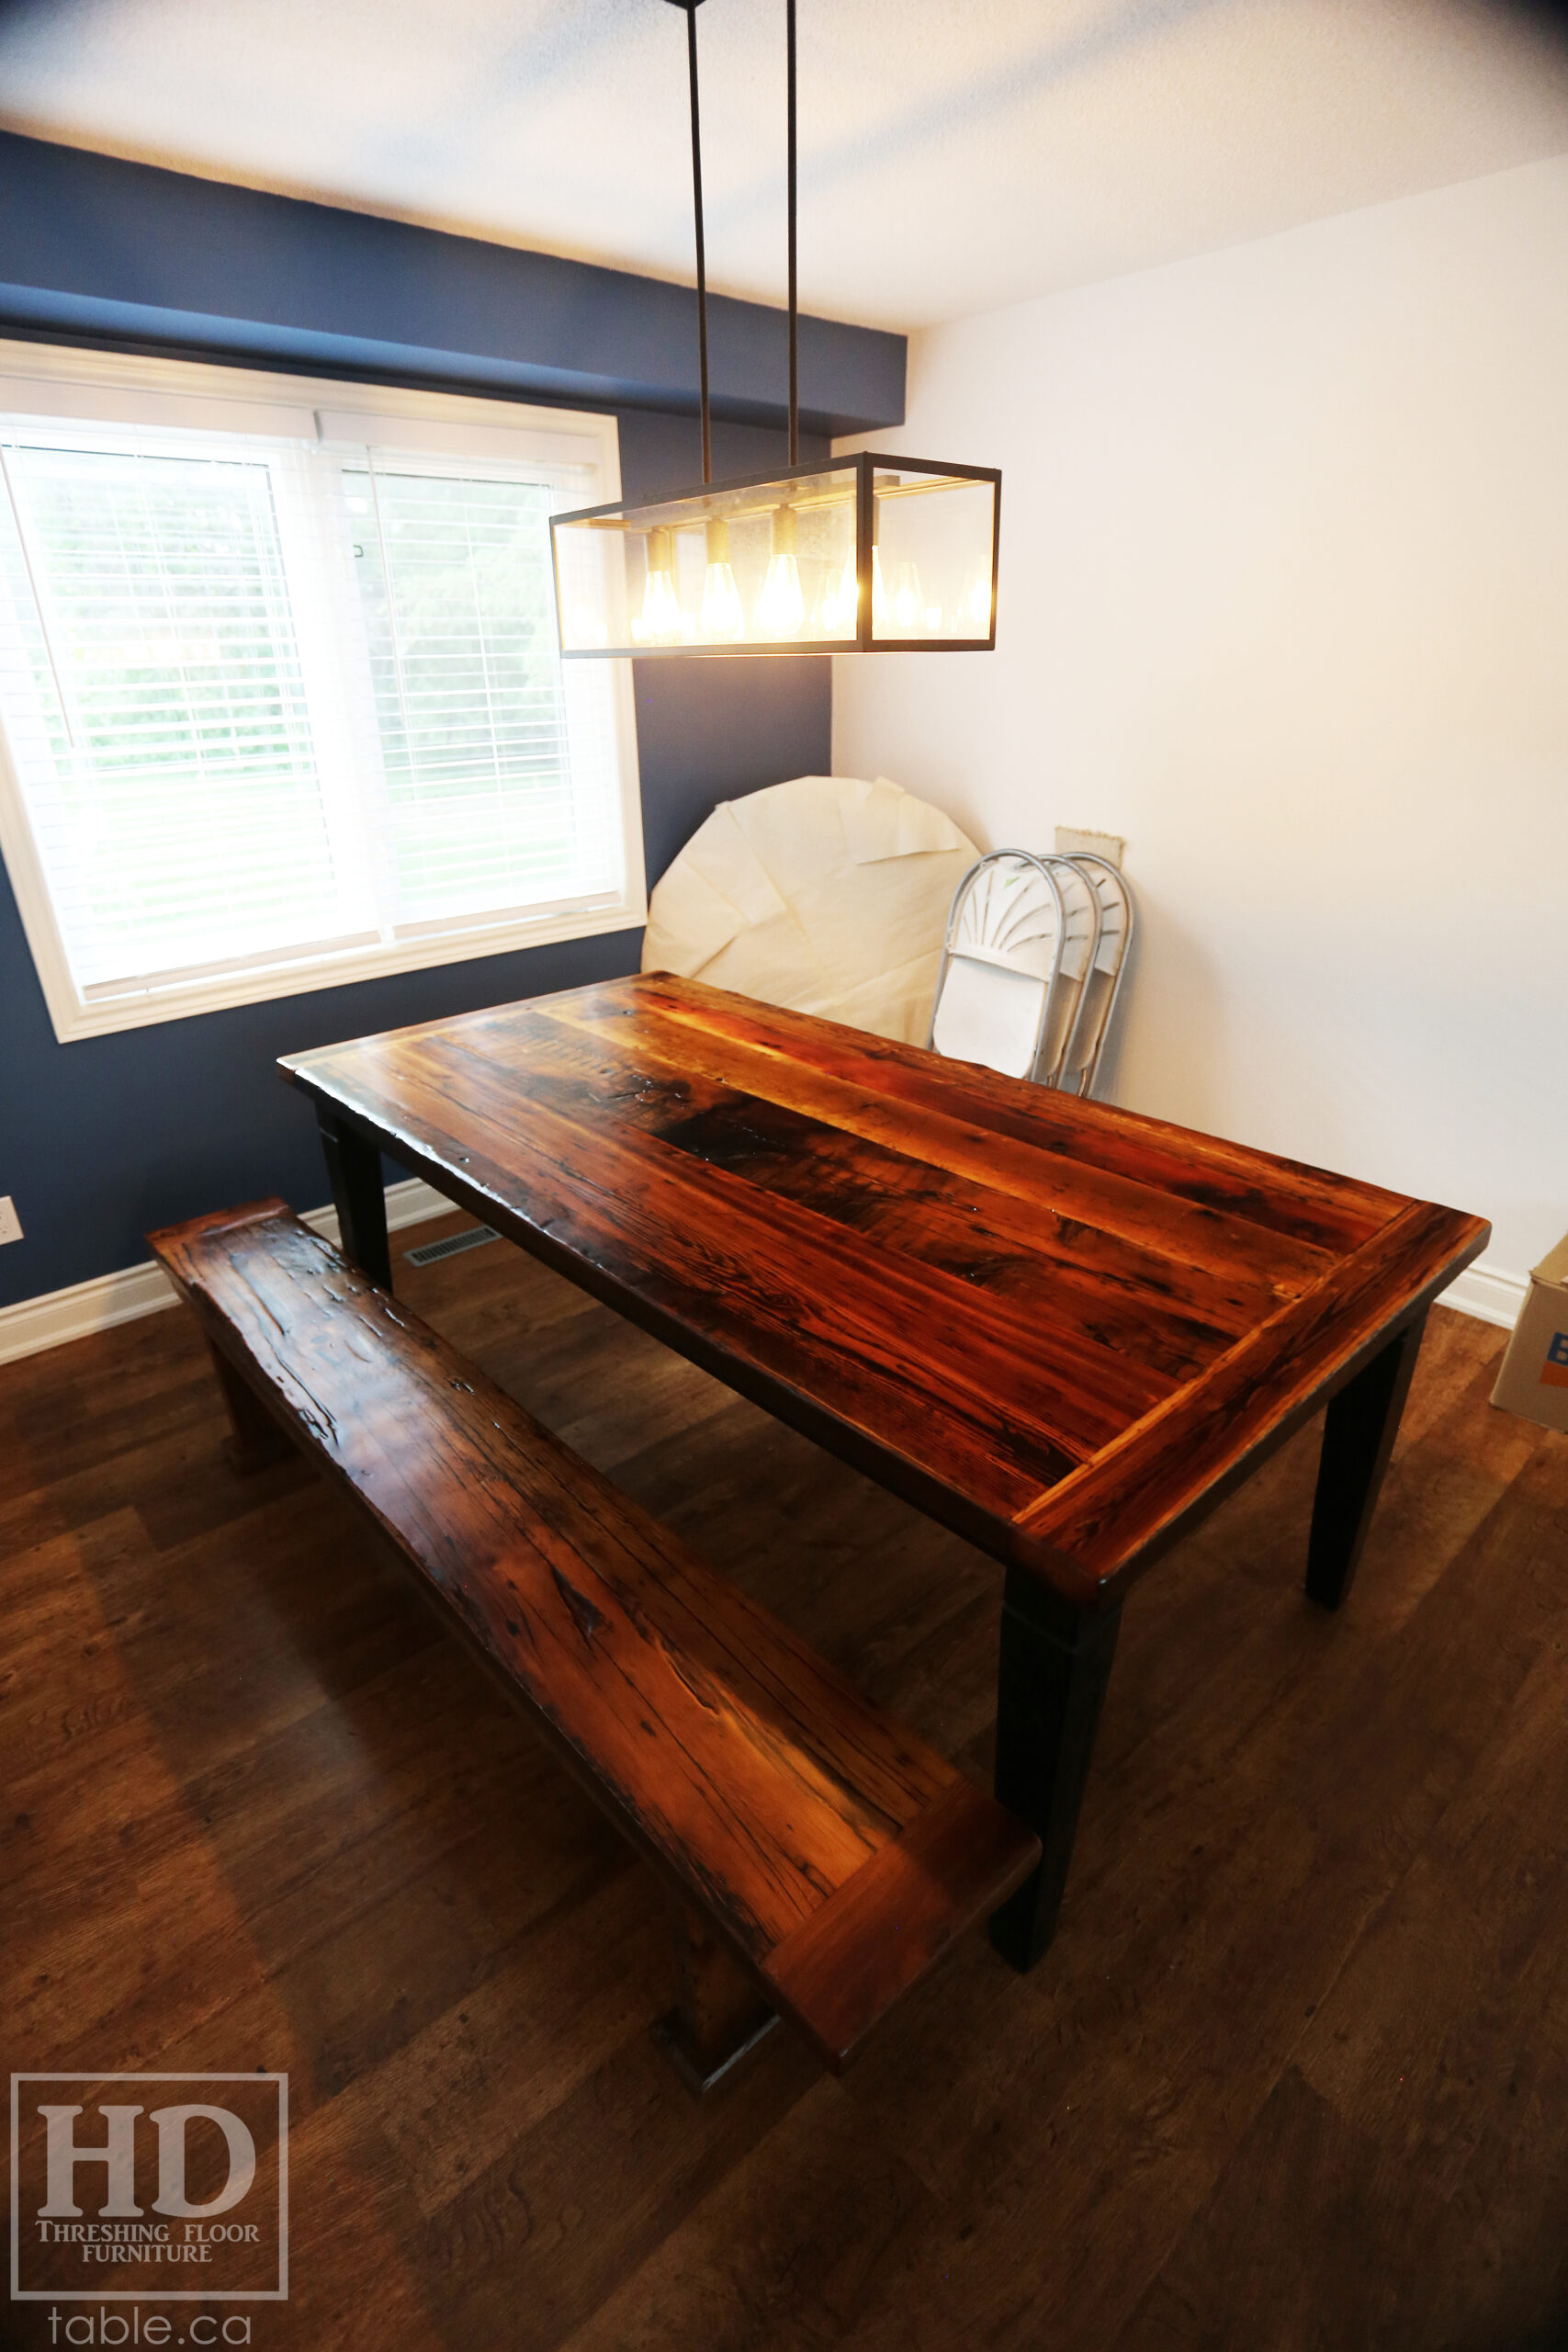 Rustic Harvest Table & Bench made from Ontario Barnwood with Epoxy + Polyurethane Finish / www.table.ca 